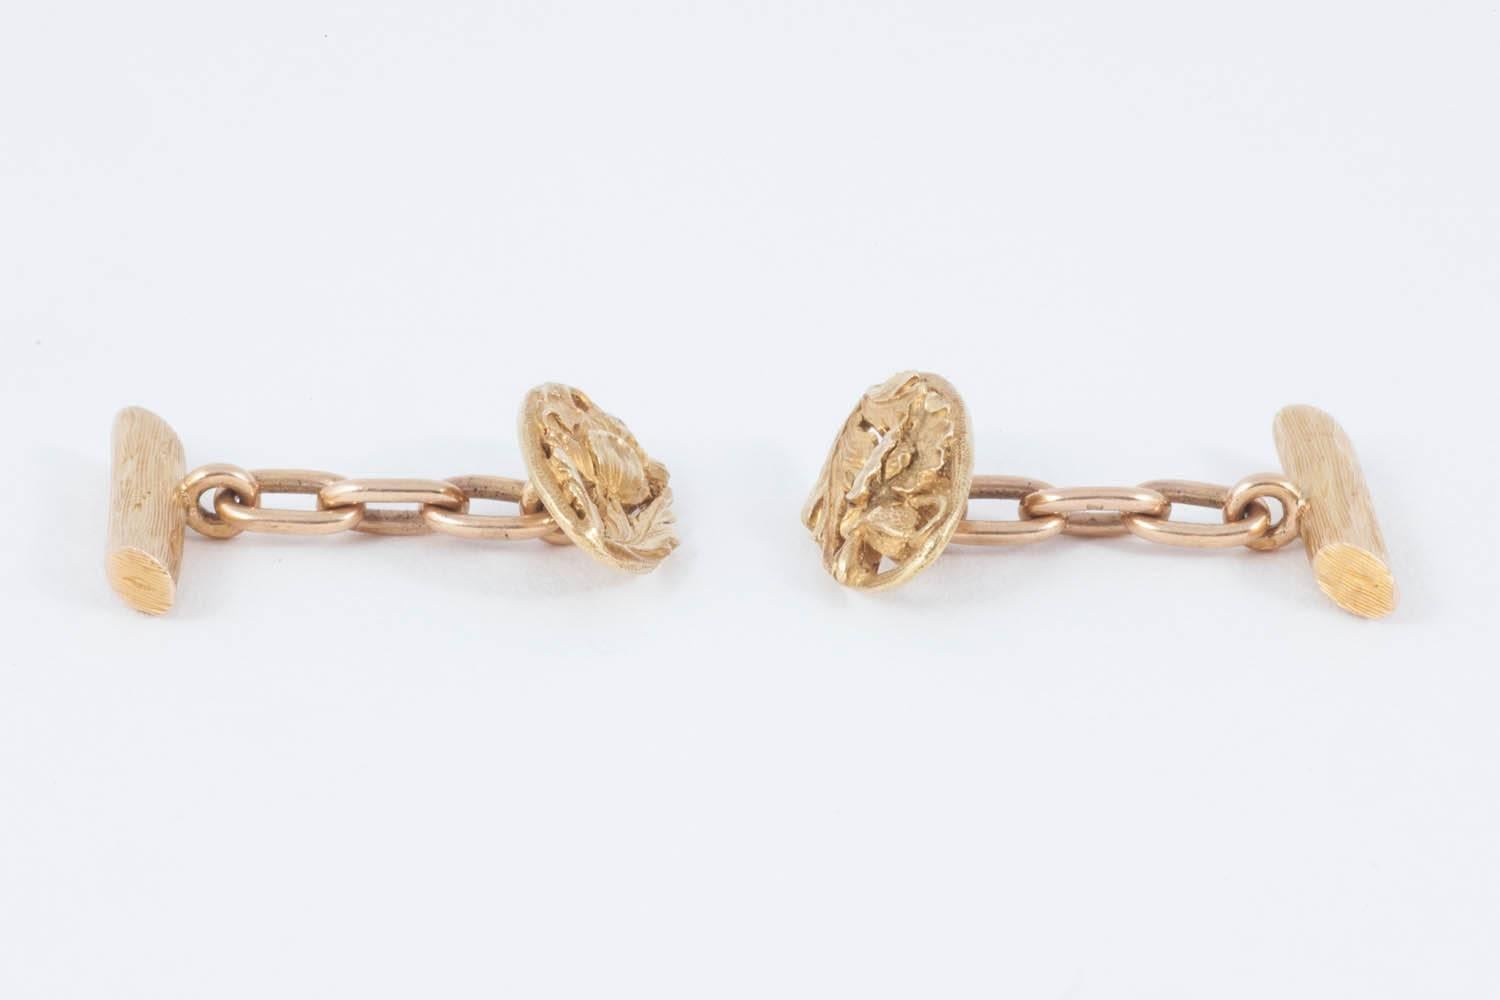 Antique cufflinks in 18 karat yellow gold openwork with a carved floral, leaf and bud design. Single sided with a carved branch terminal and chain link connection. In fine condition, of perfect weight and exceptional patina. French marks and from